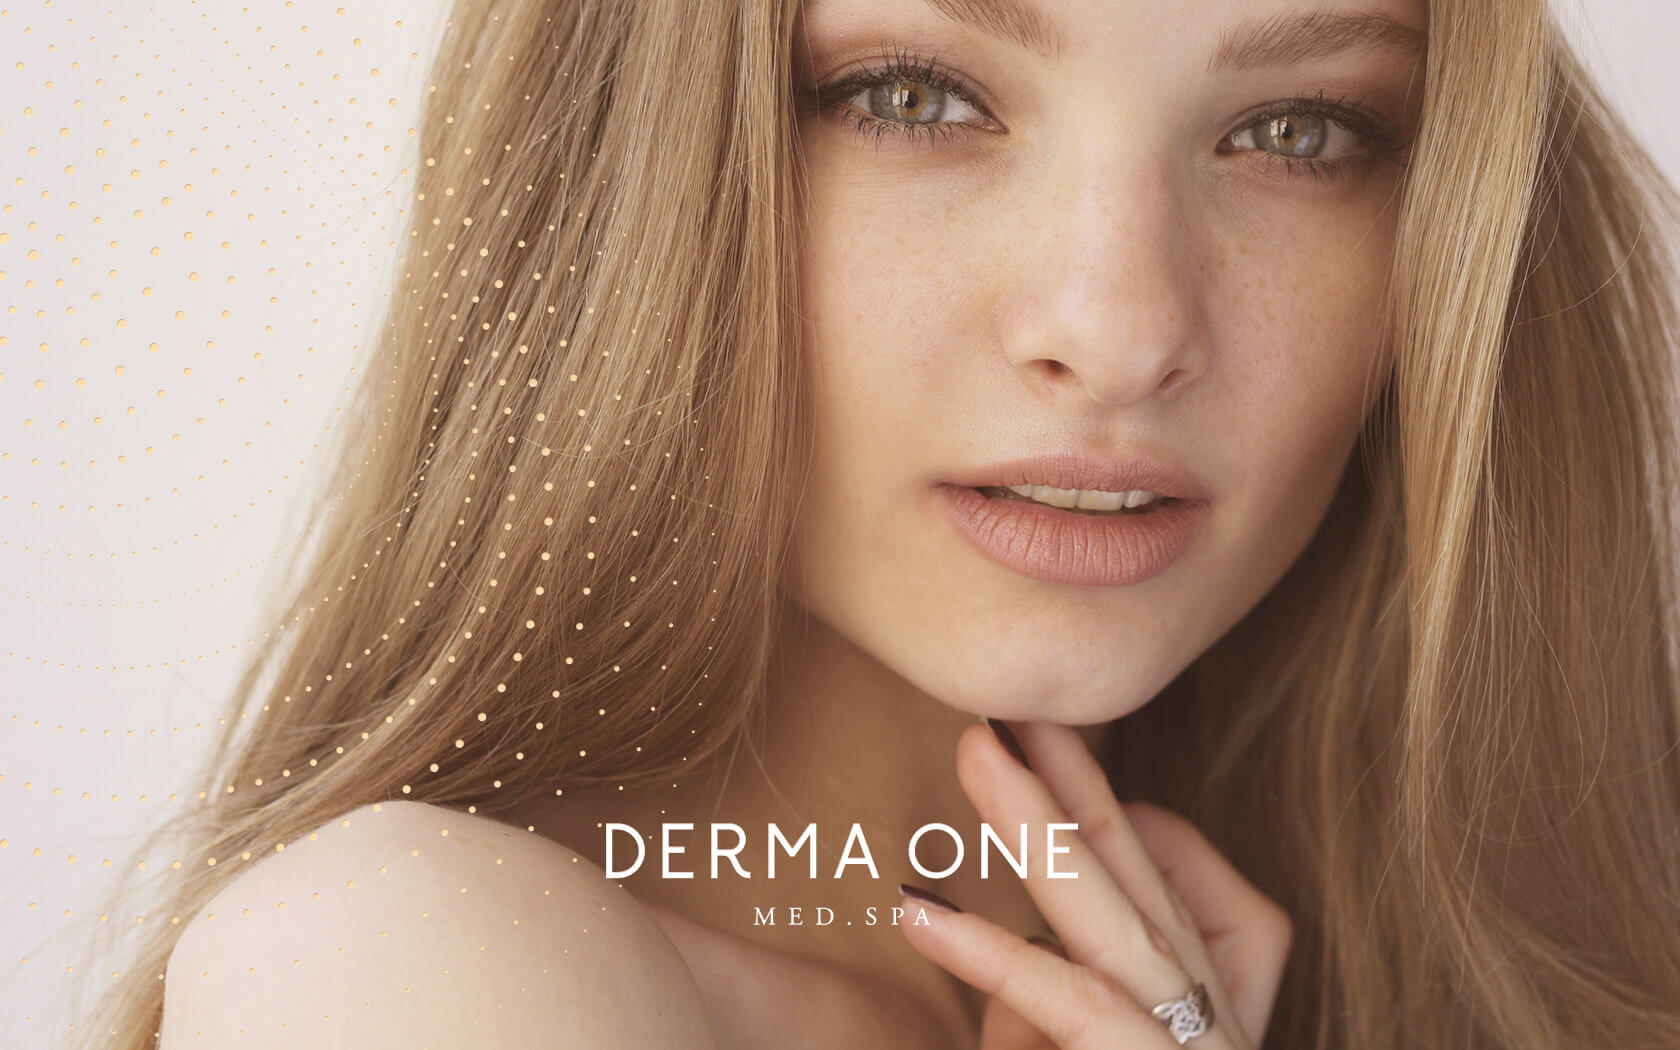 Derma One. Brand logo and graphic device with lady model image